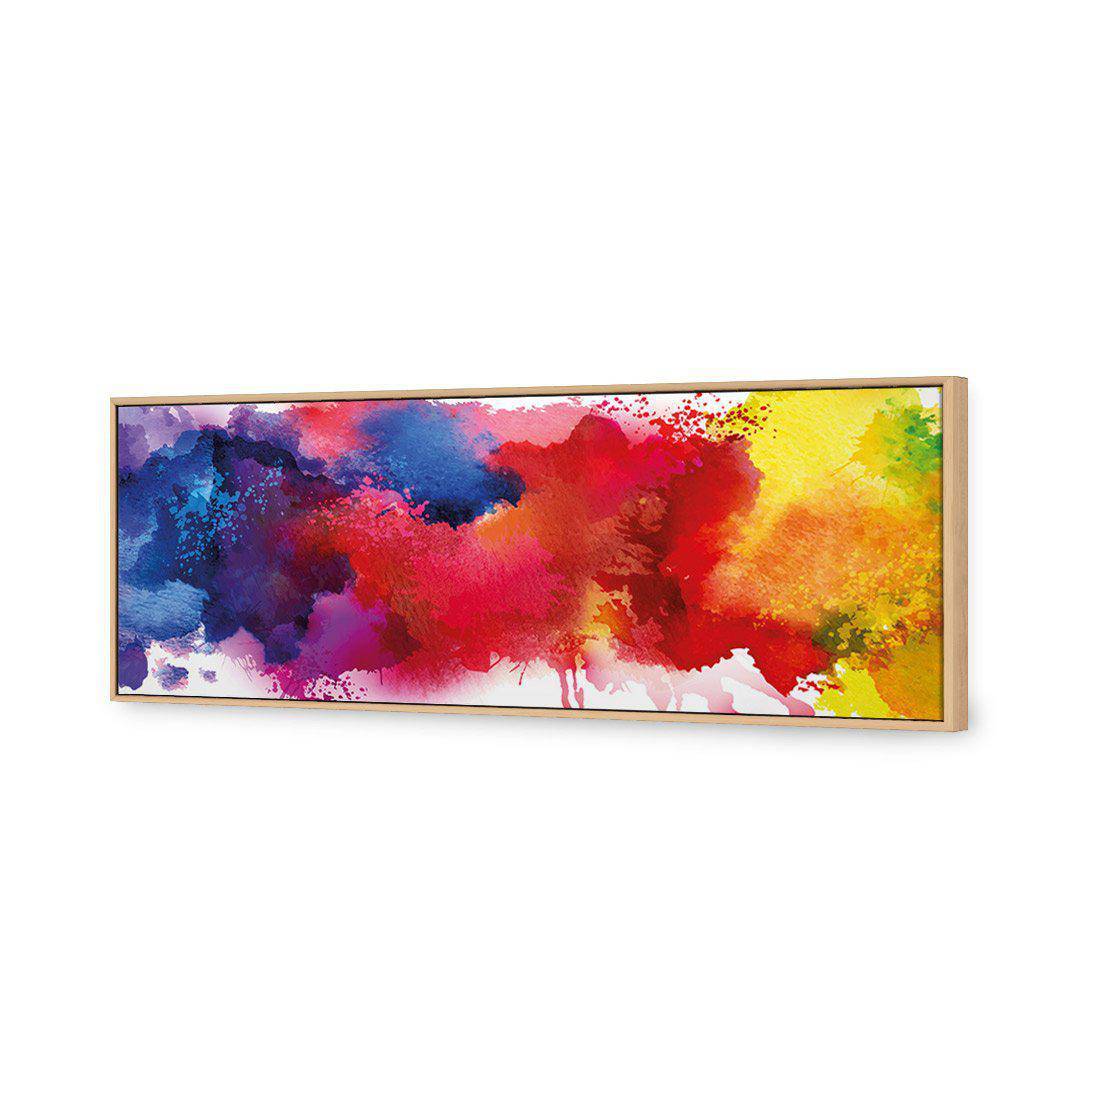 Primary Stains Canvas Art-Canvas-Wall Art Designs-60x20cm-Canvas - Oak Frame-Wall Art Designs